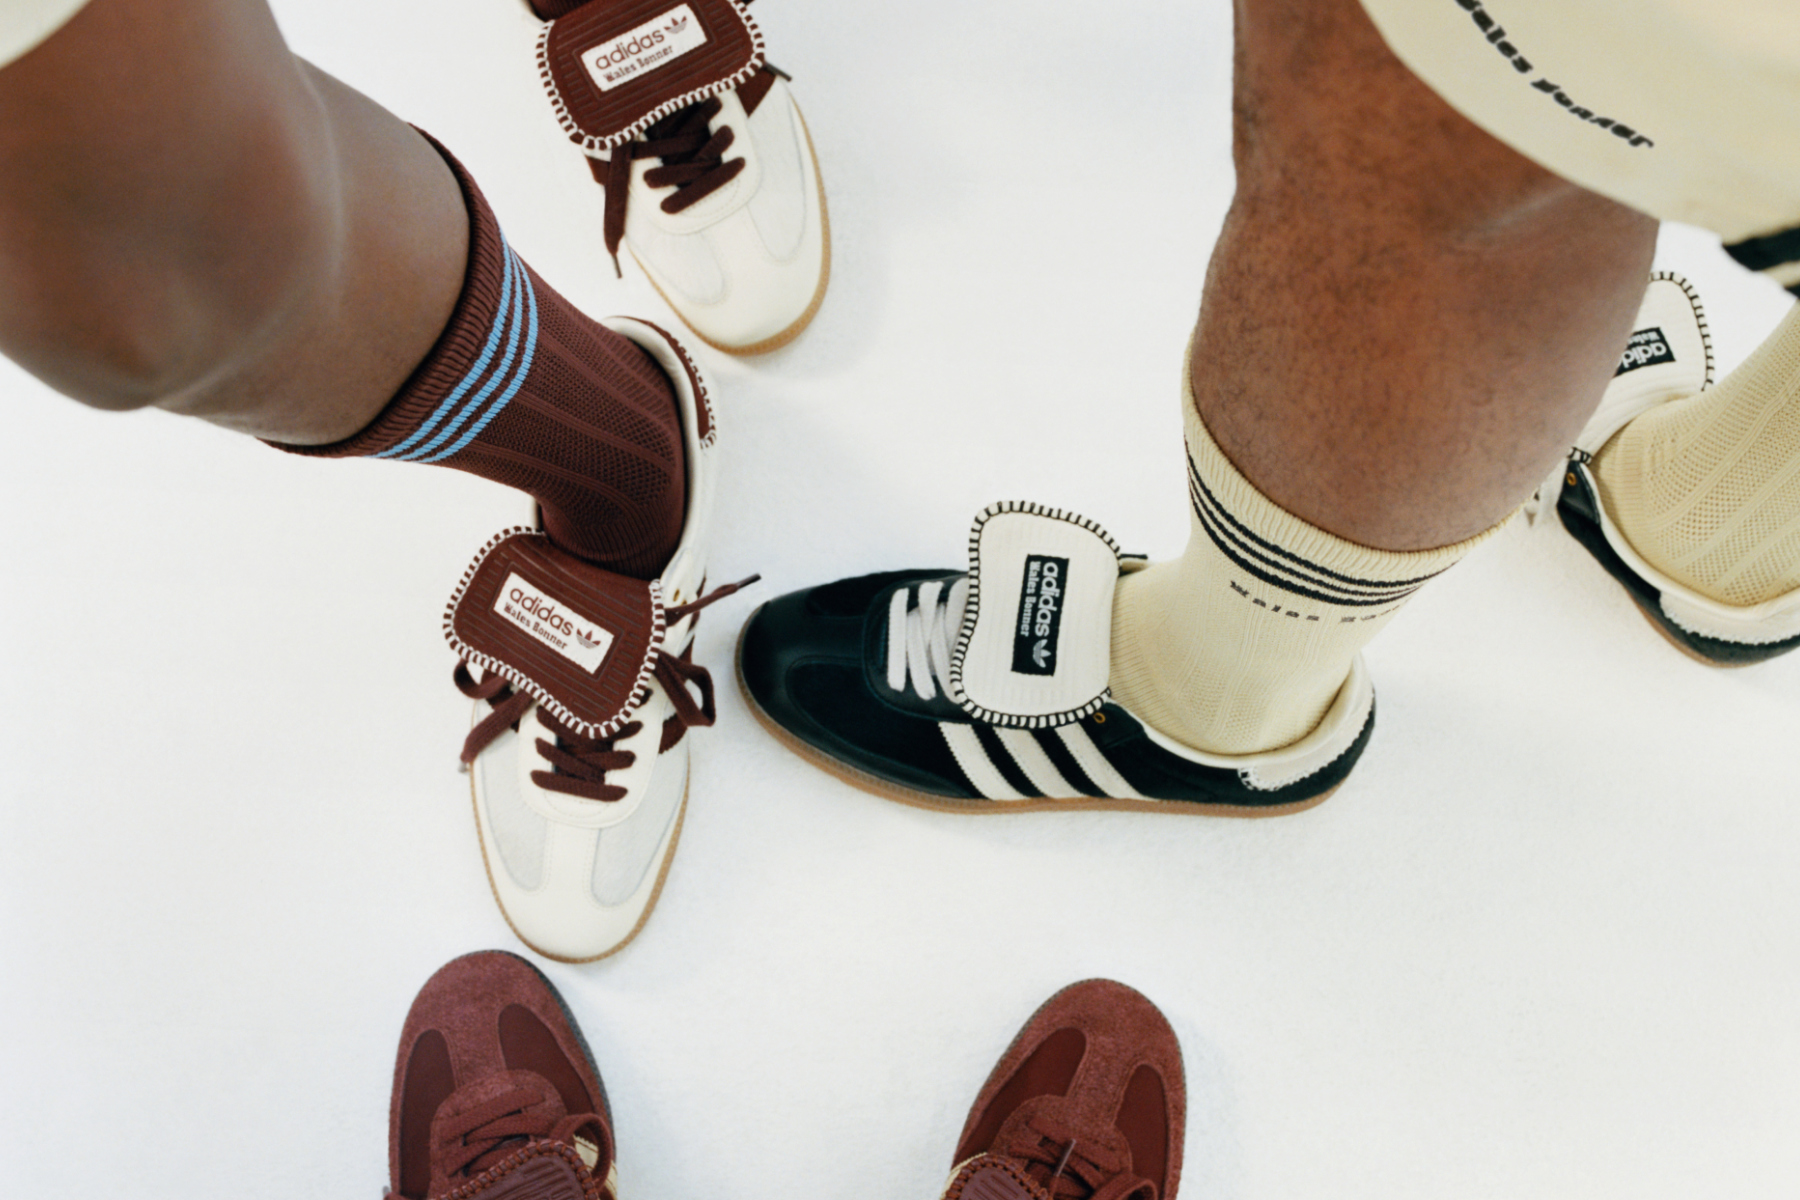 Wales Bonner x adidas FW23: Sambas, Release Date, Prices